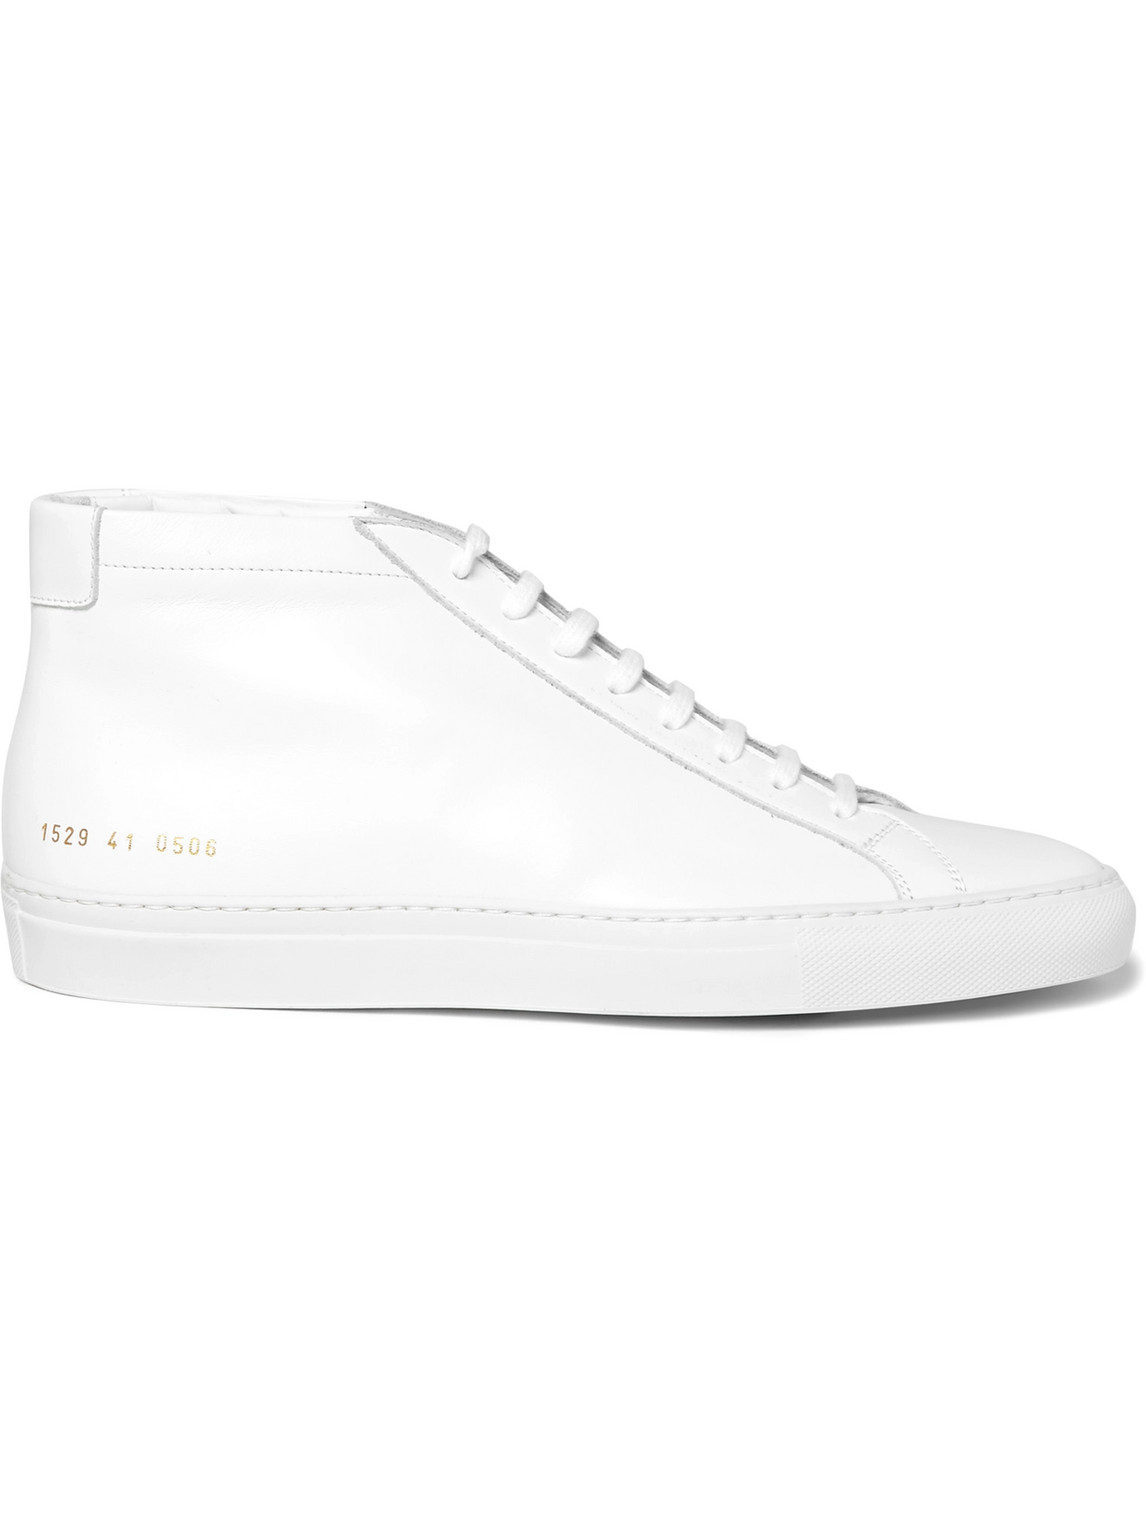 Shop Common Projects Original Achilles Leather High-top Sneakers In White